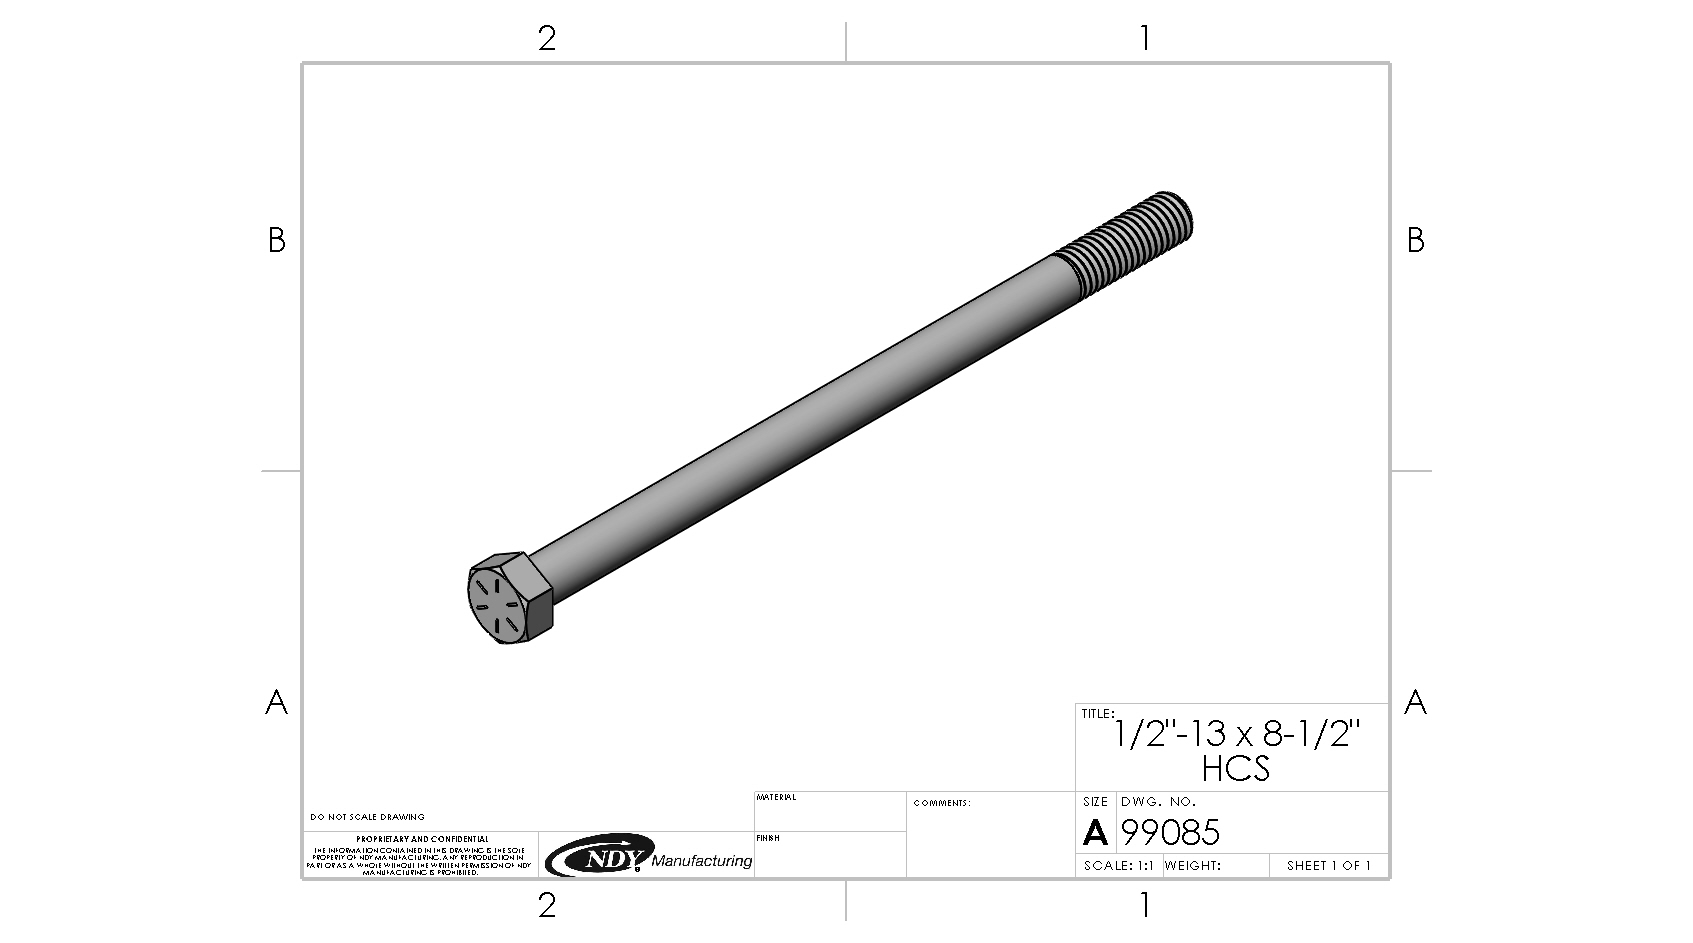 A black and white drawing of a 1/2" - 13 x 8 - 1/2" Hex Cap Screw.